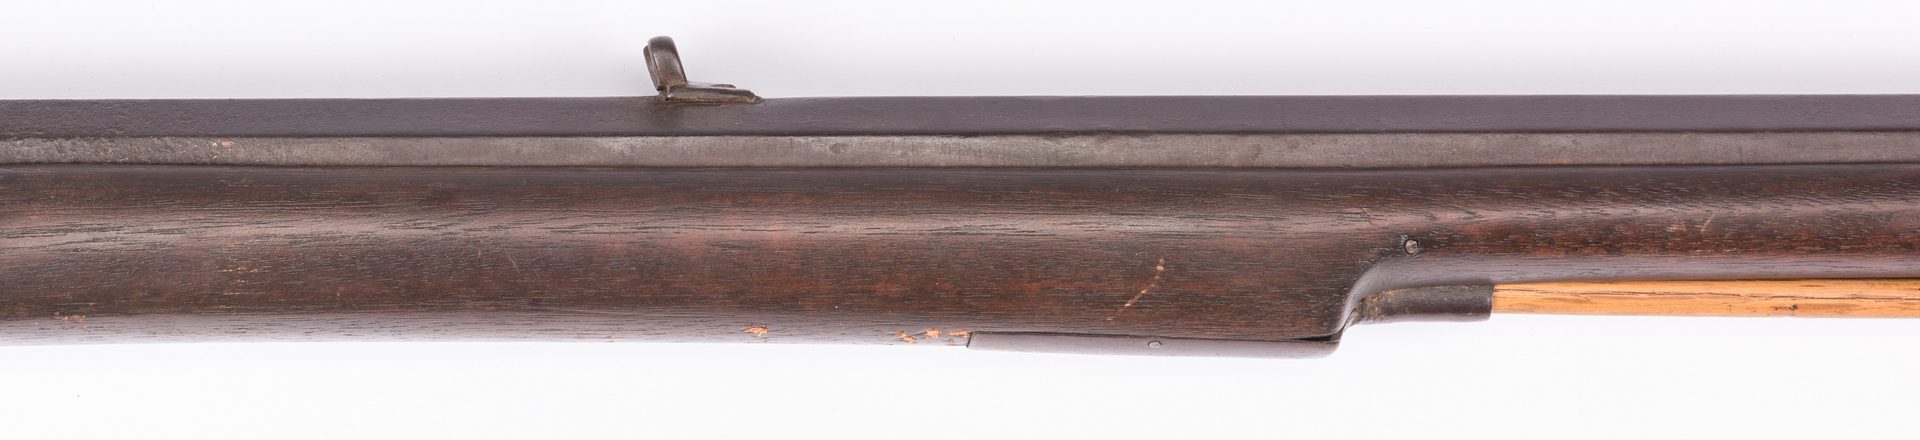 Lot 495: East Tennessee Half Stock Percussion Rifle, .38 Cal.